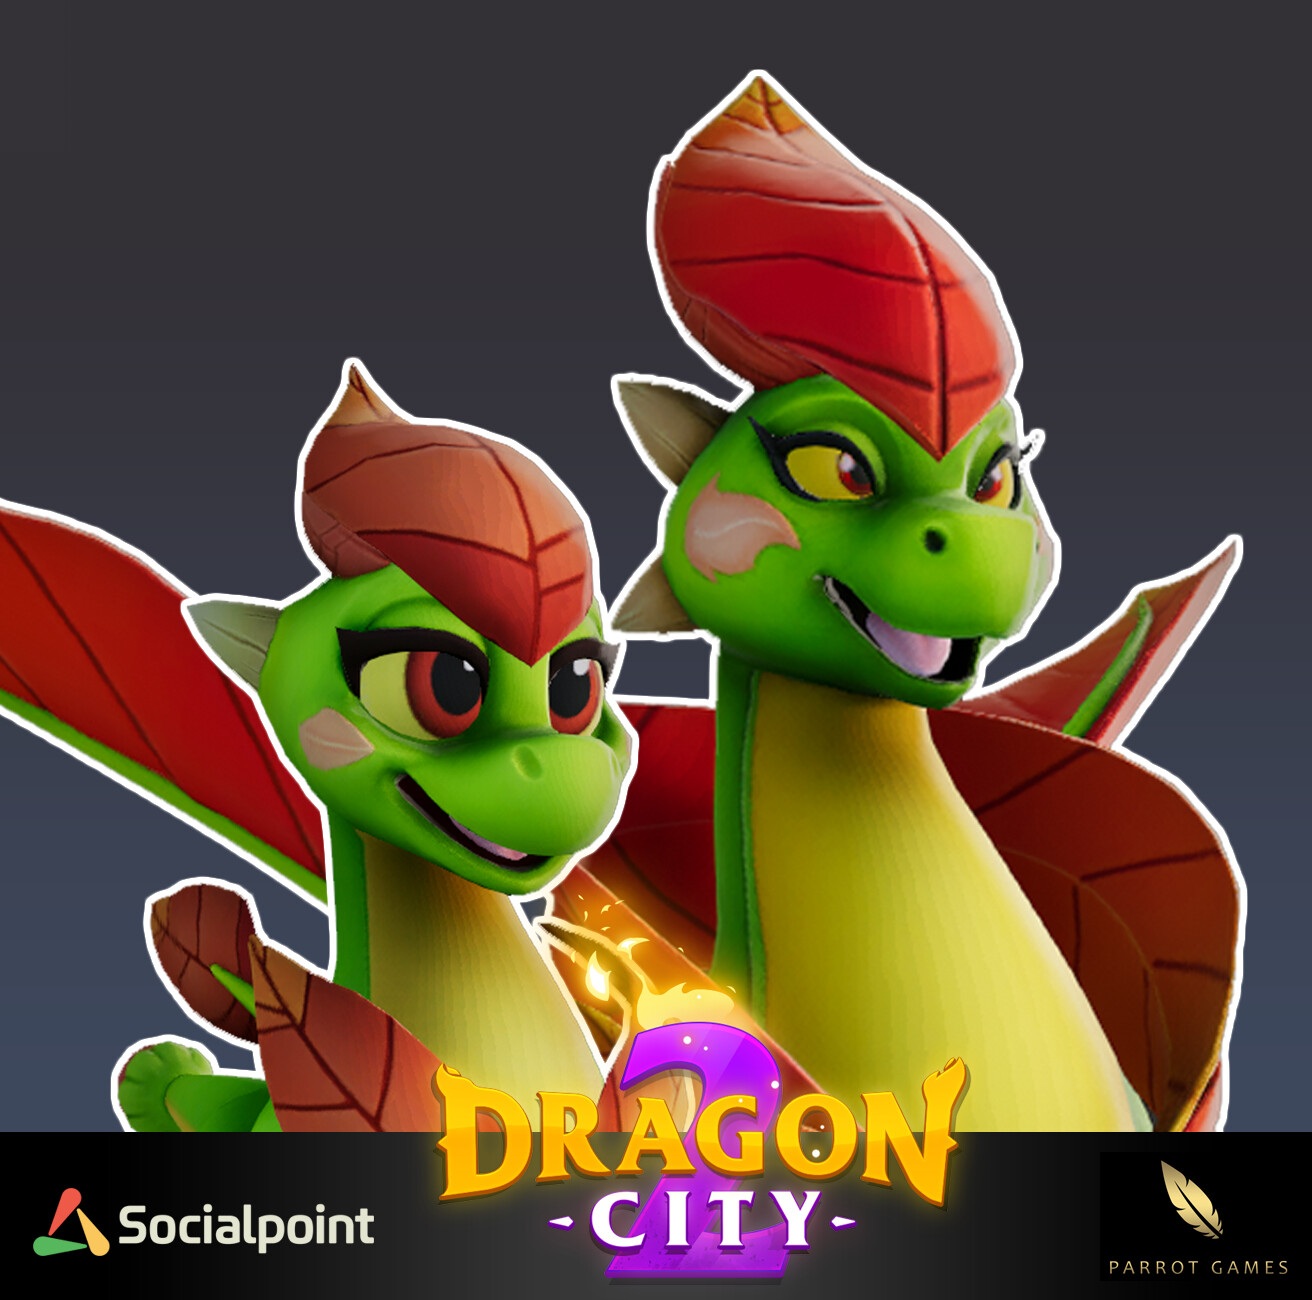 Dragon City 2 by Parrot Games SL